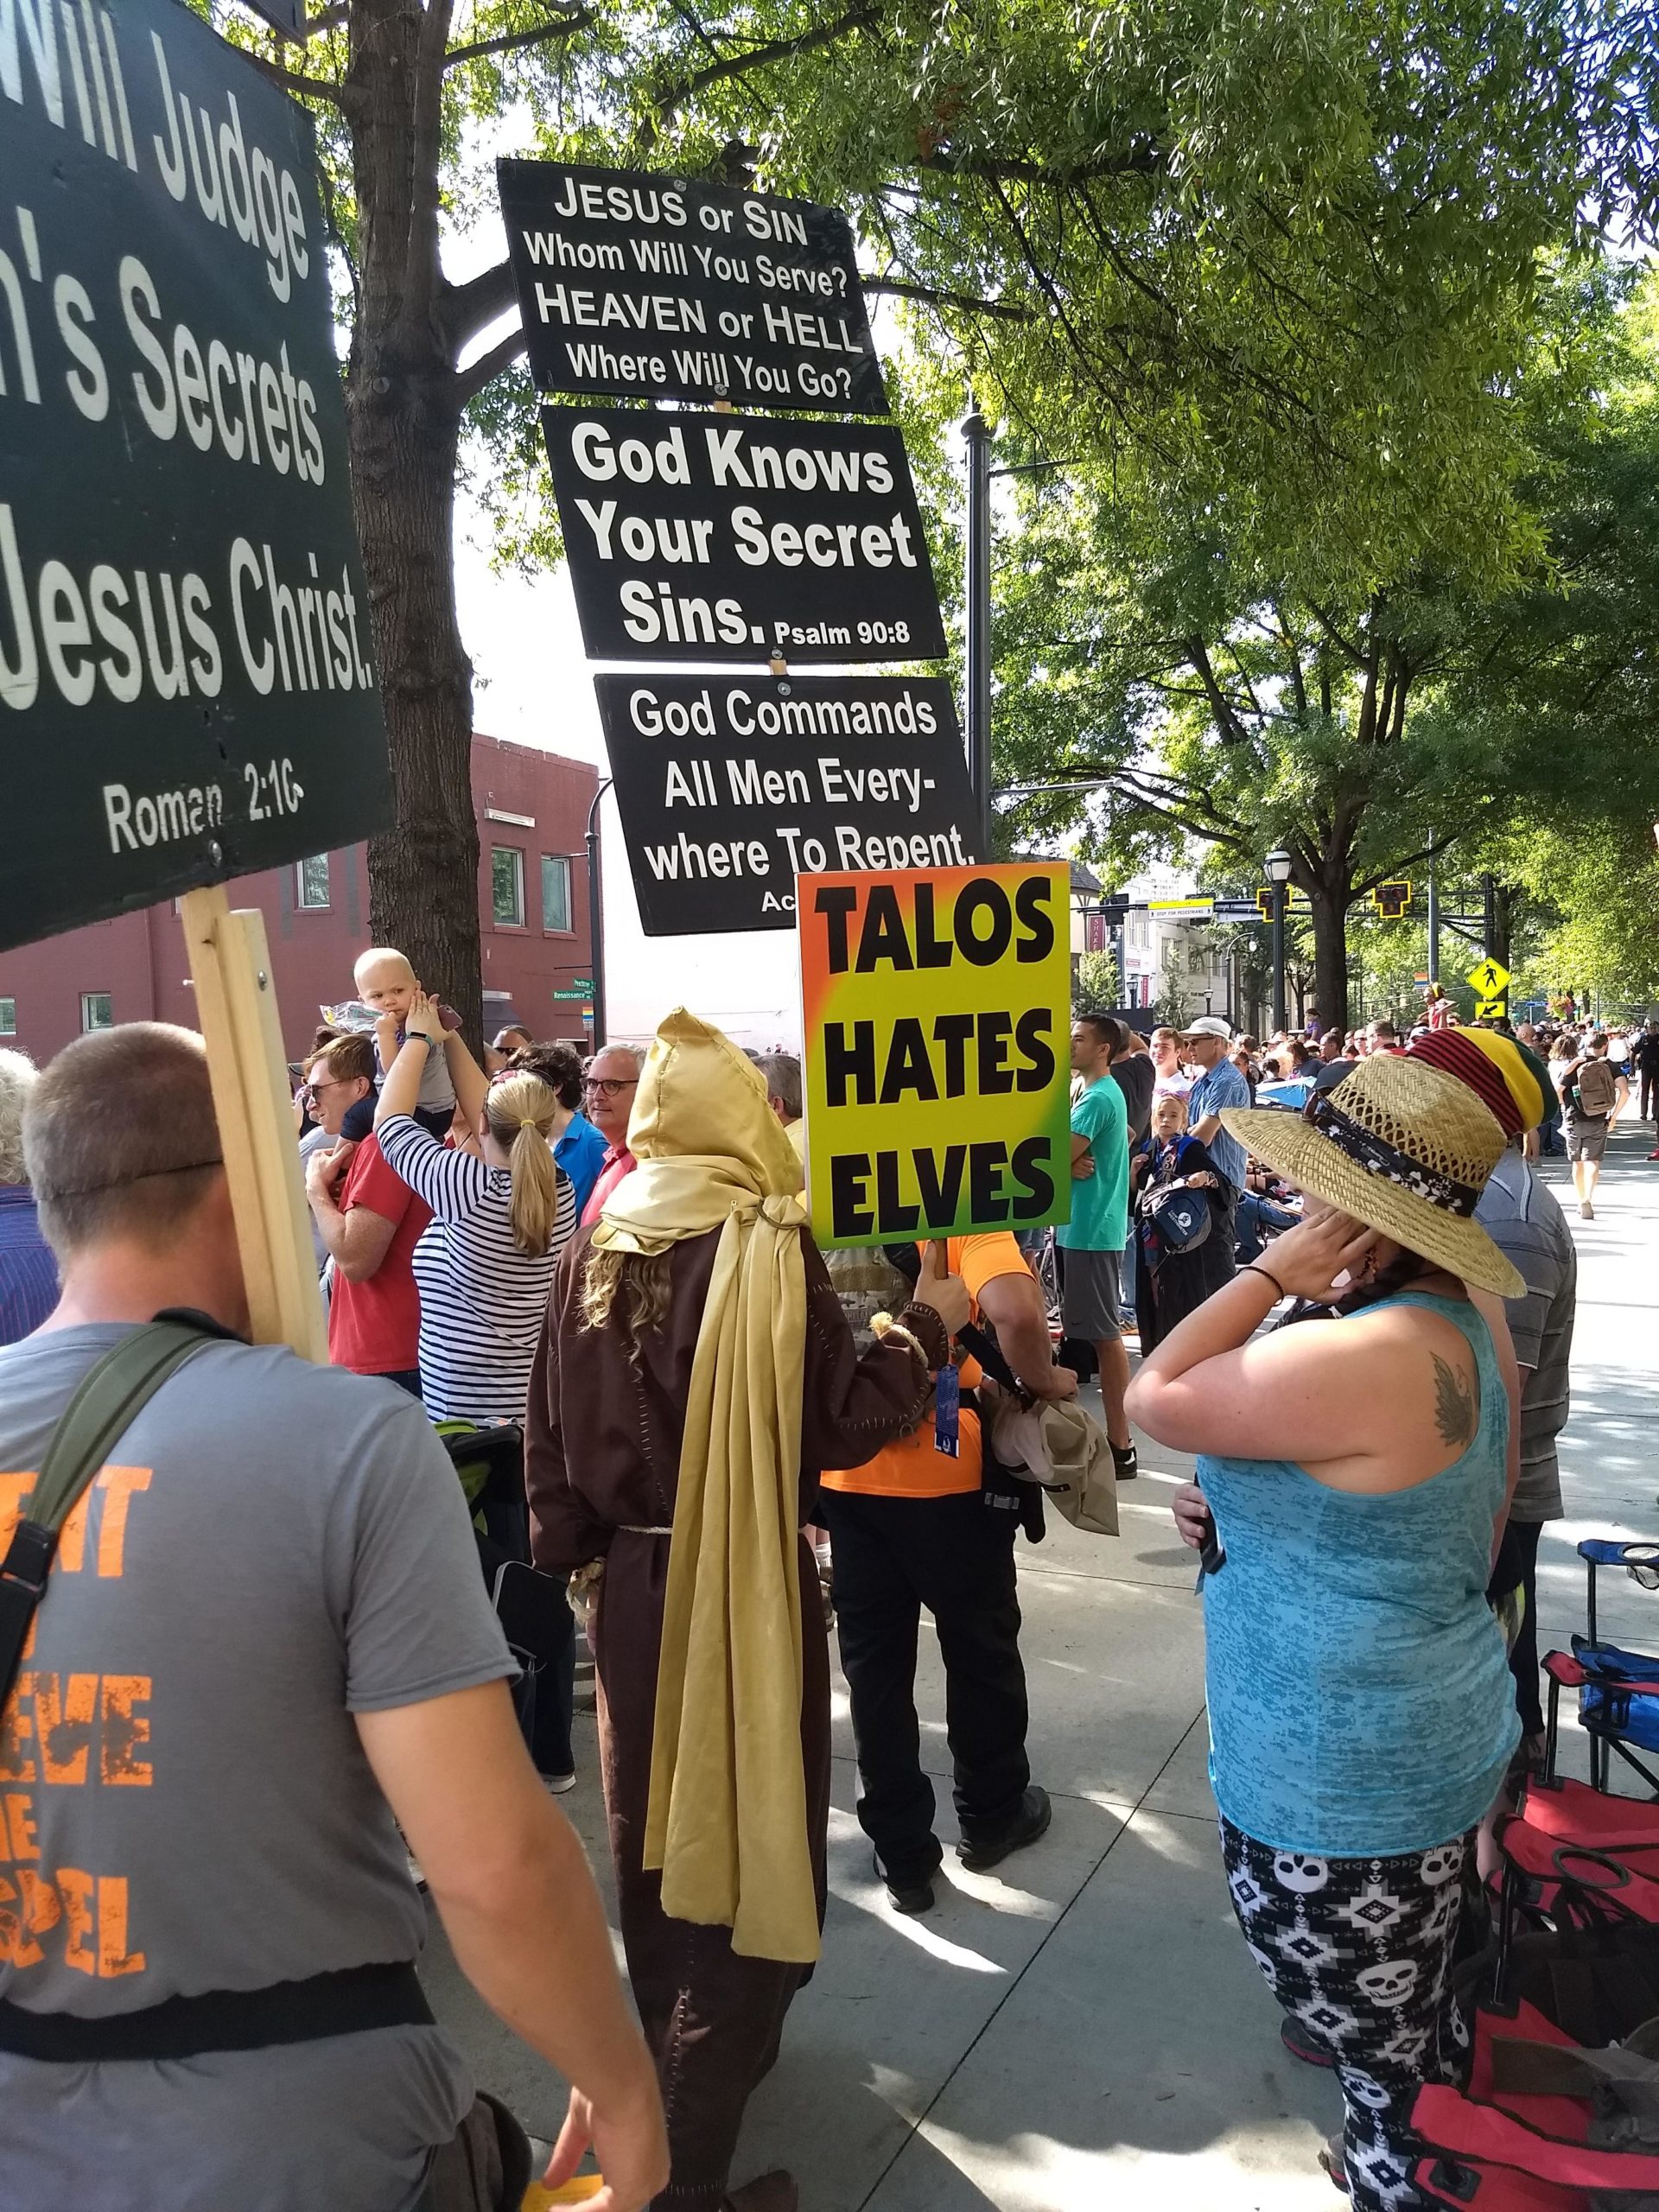 Skyrim Cosplayer Joins Christians For His Own Religious Protest